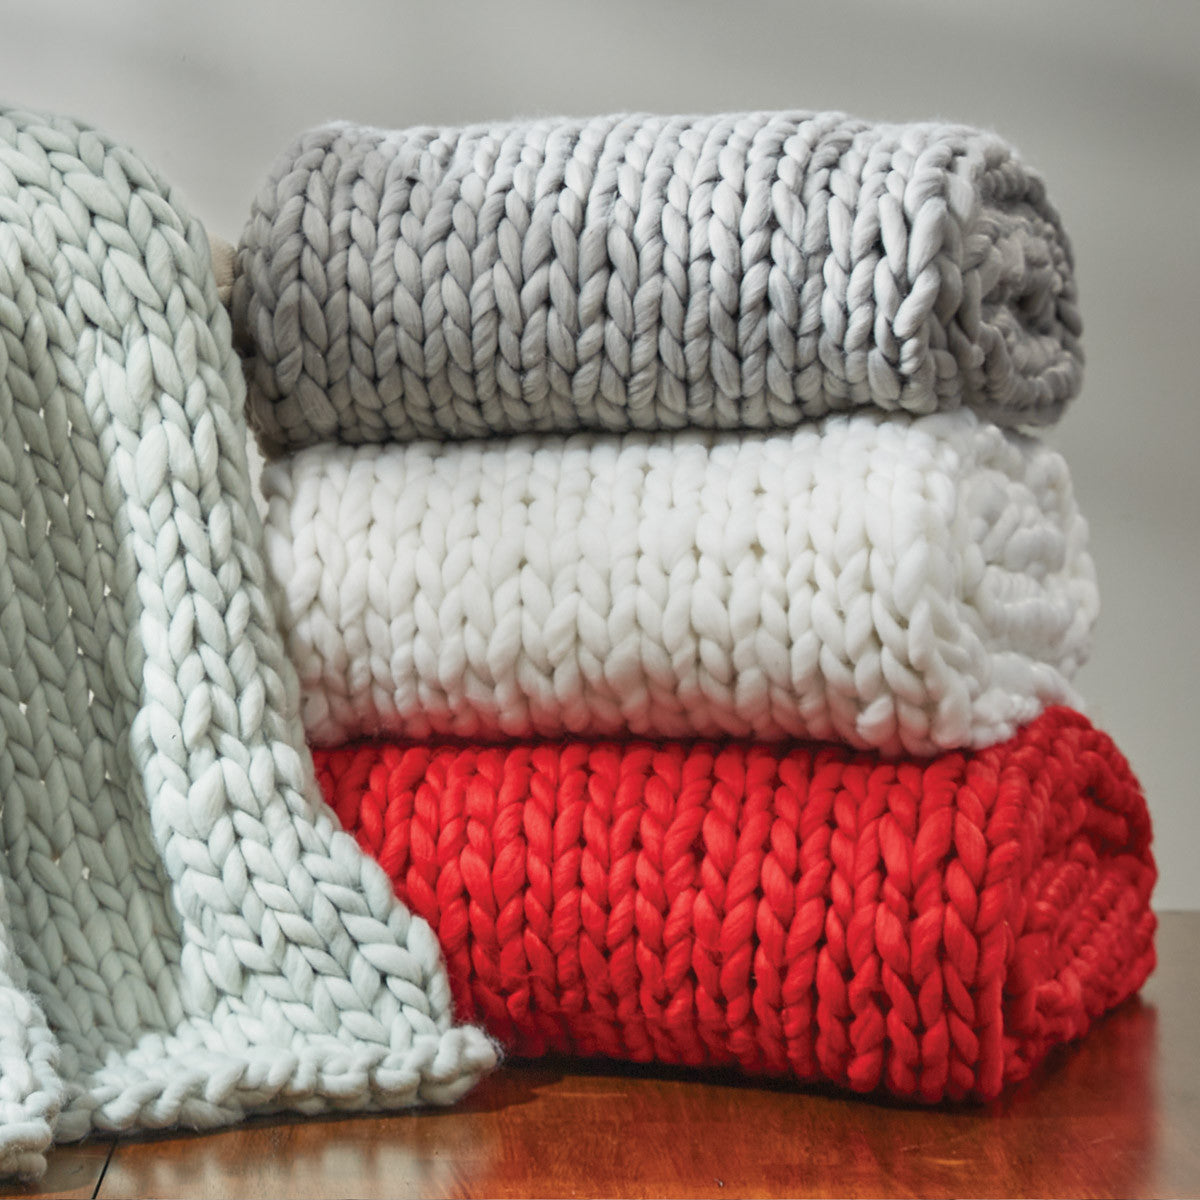 Chunky Knit Throw - Red Park Designs